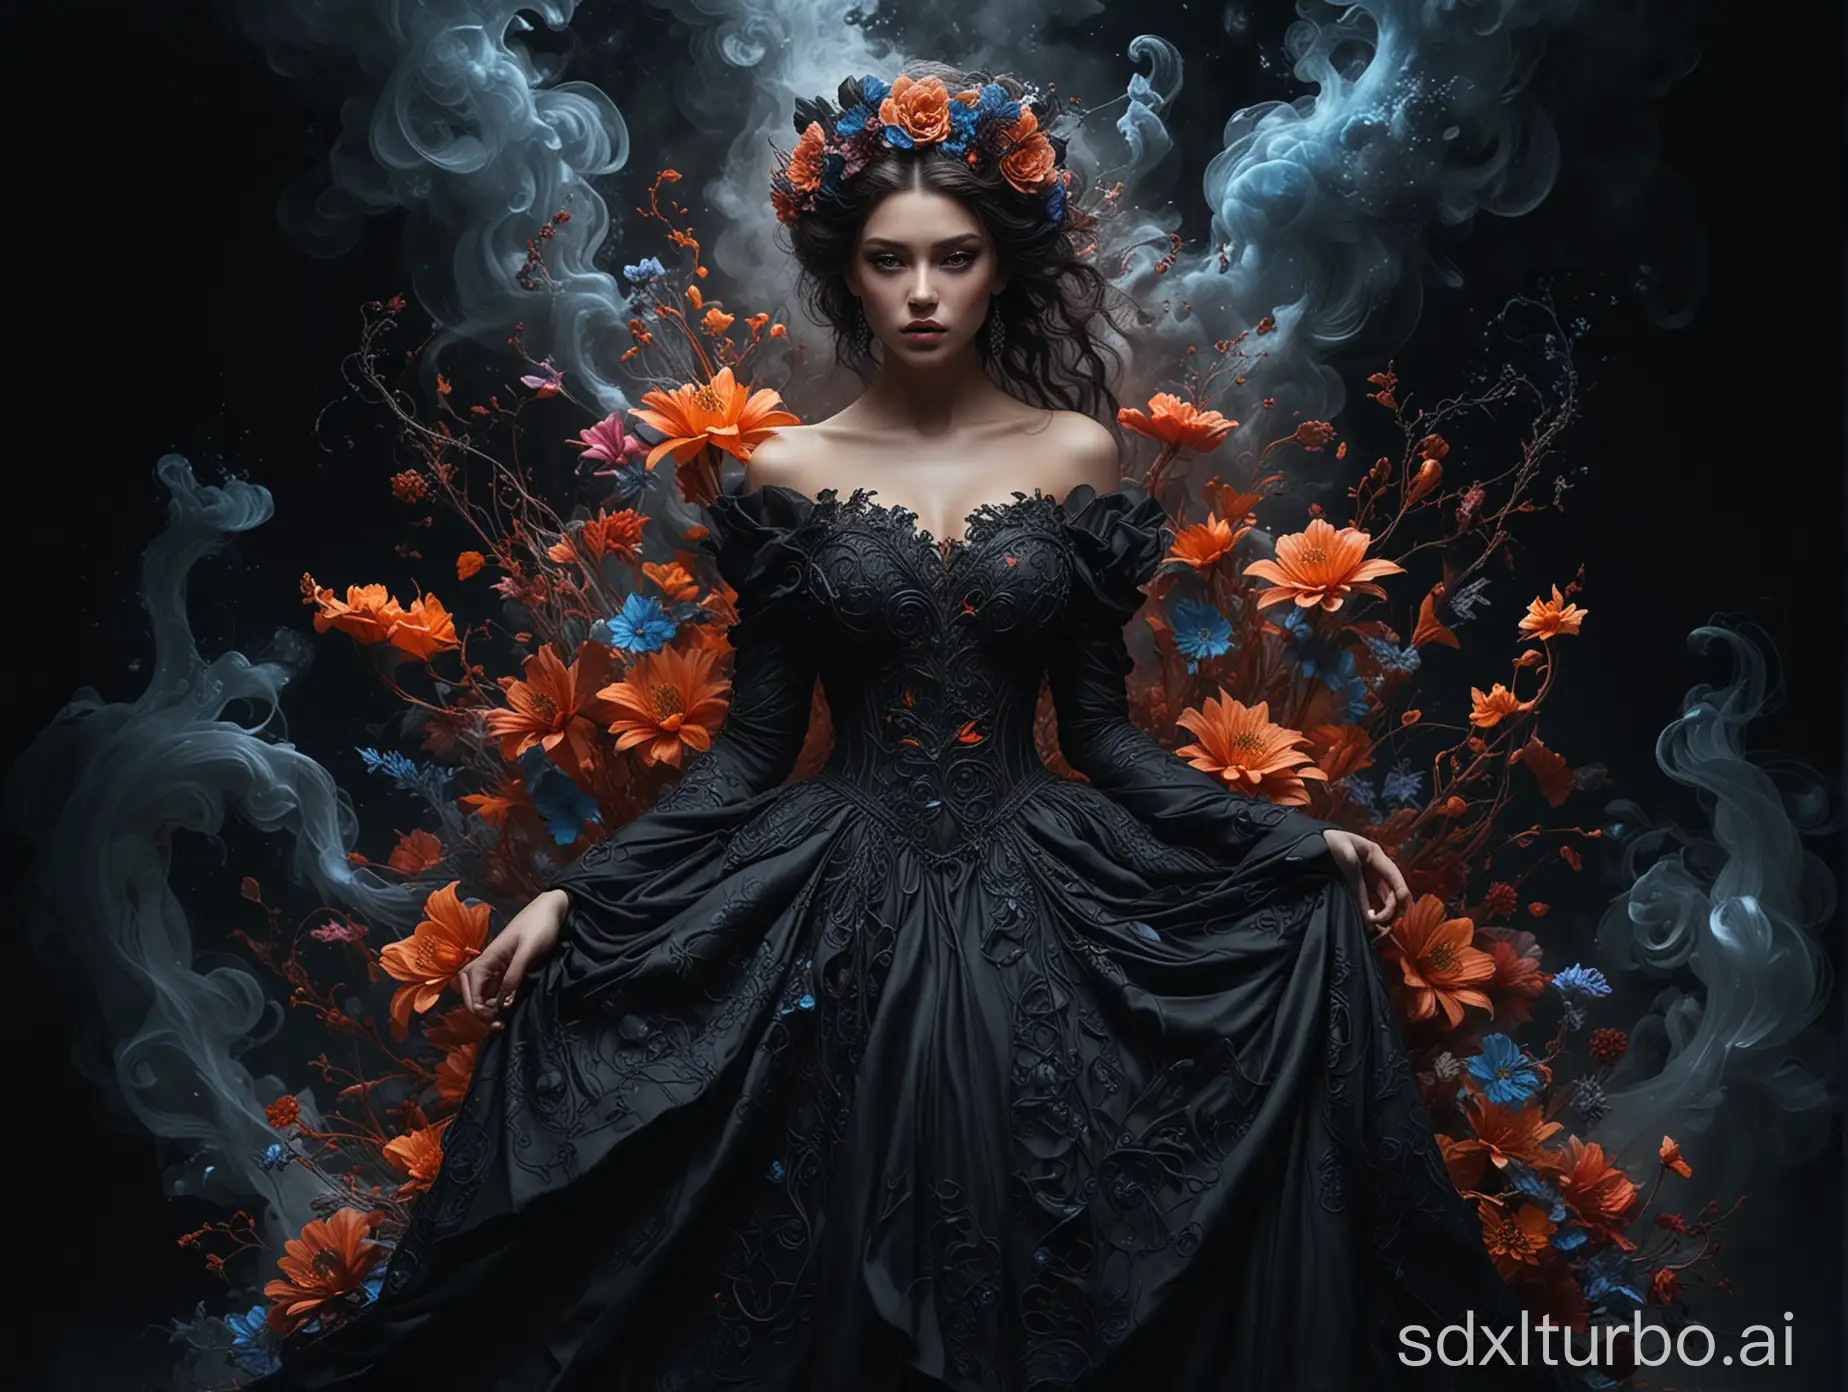 Enigmatic-Woman-in-Vibrant-Gown-mesmerizing-in-Dark-Fantasy-Poster